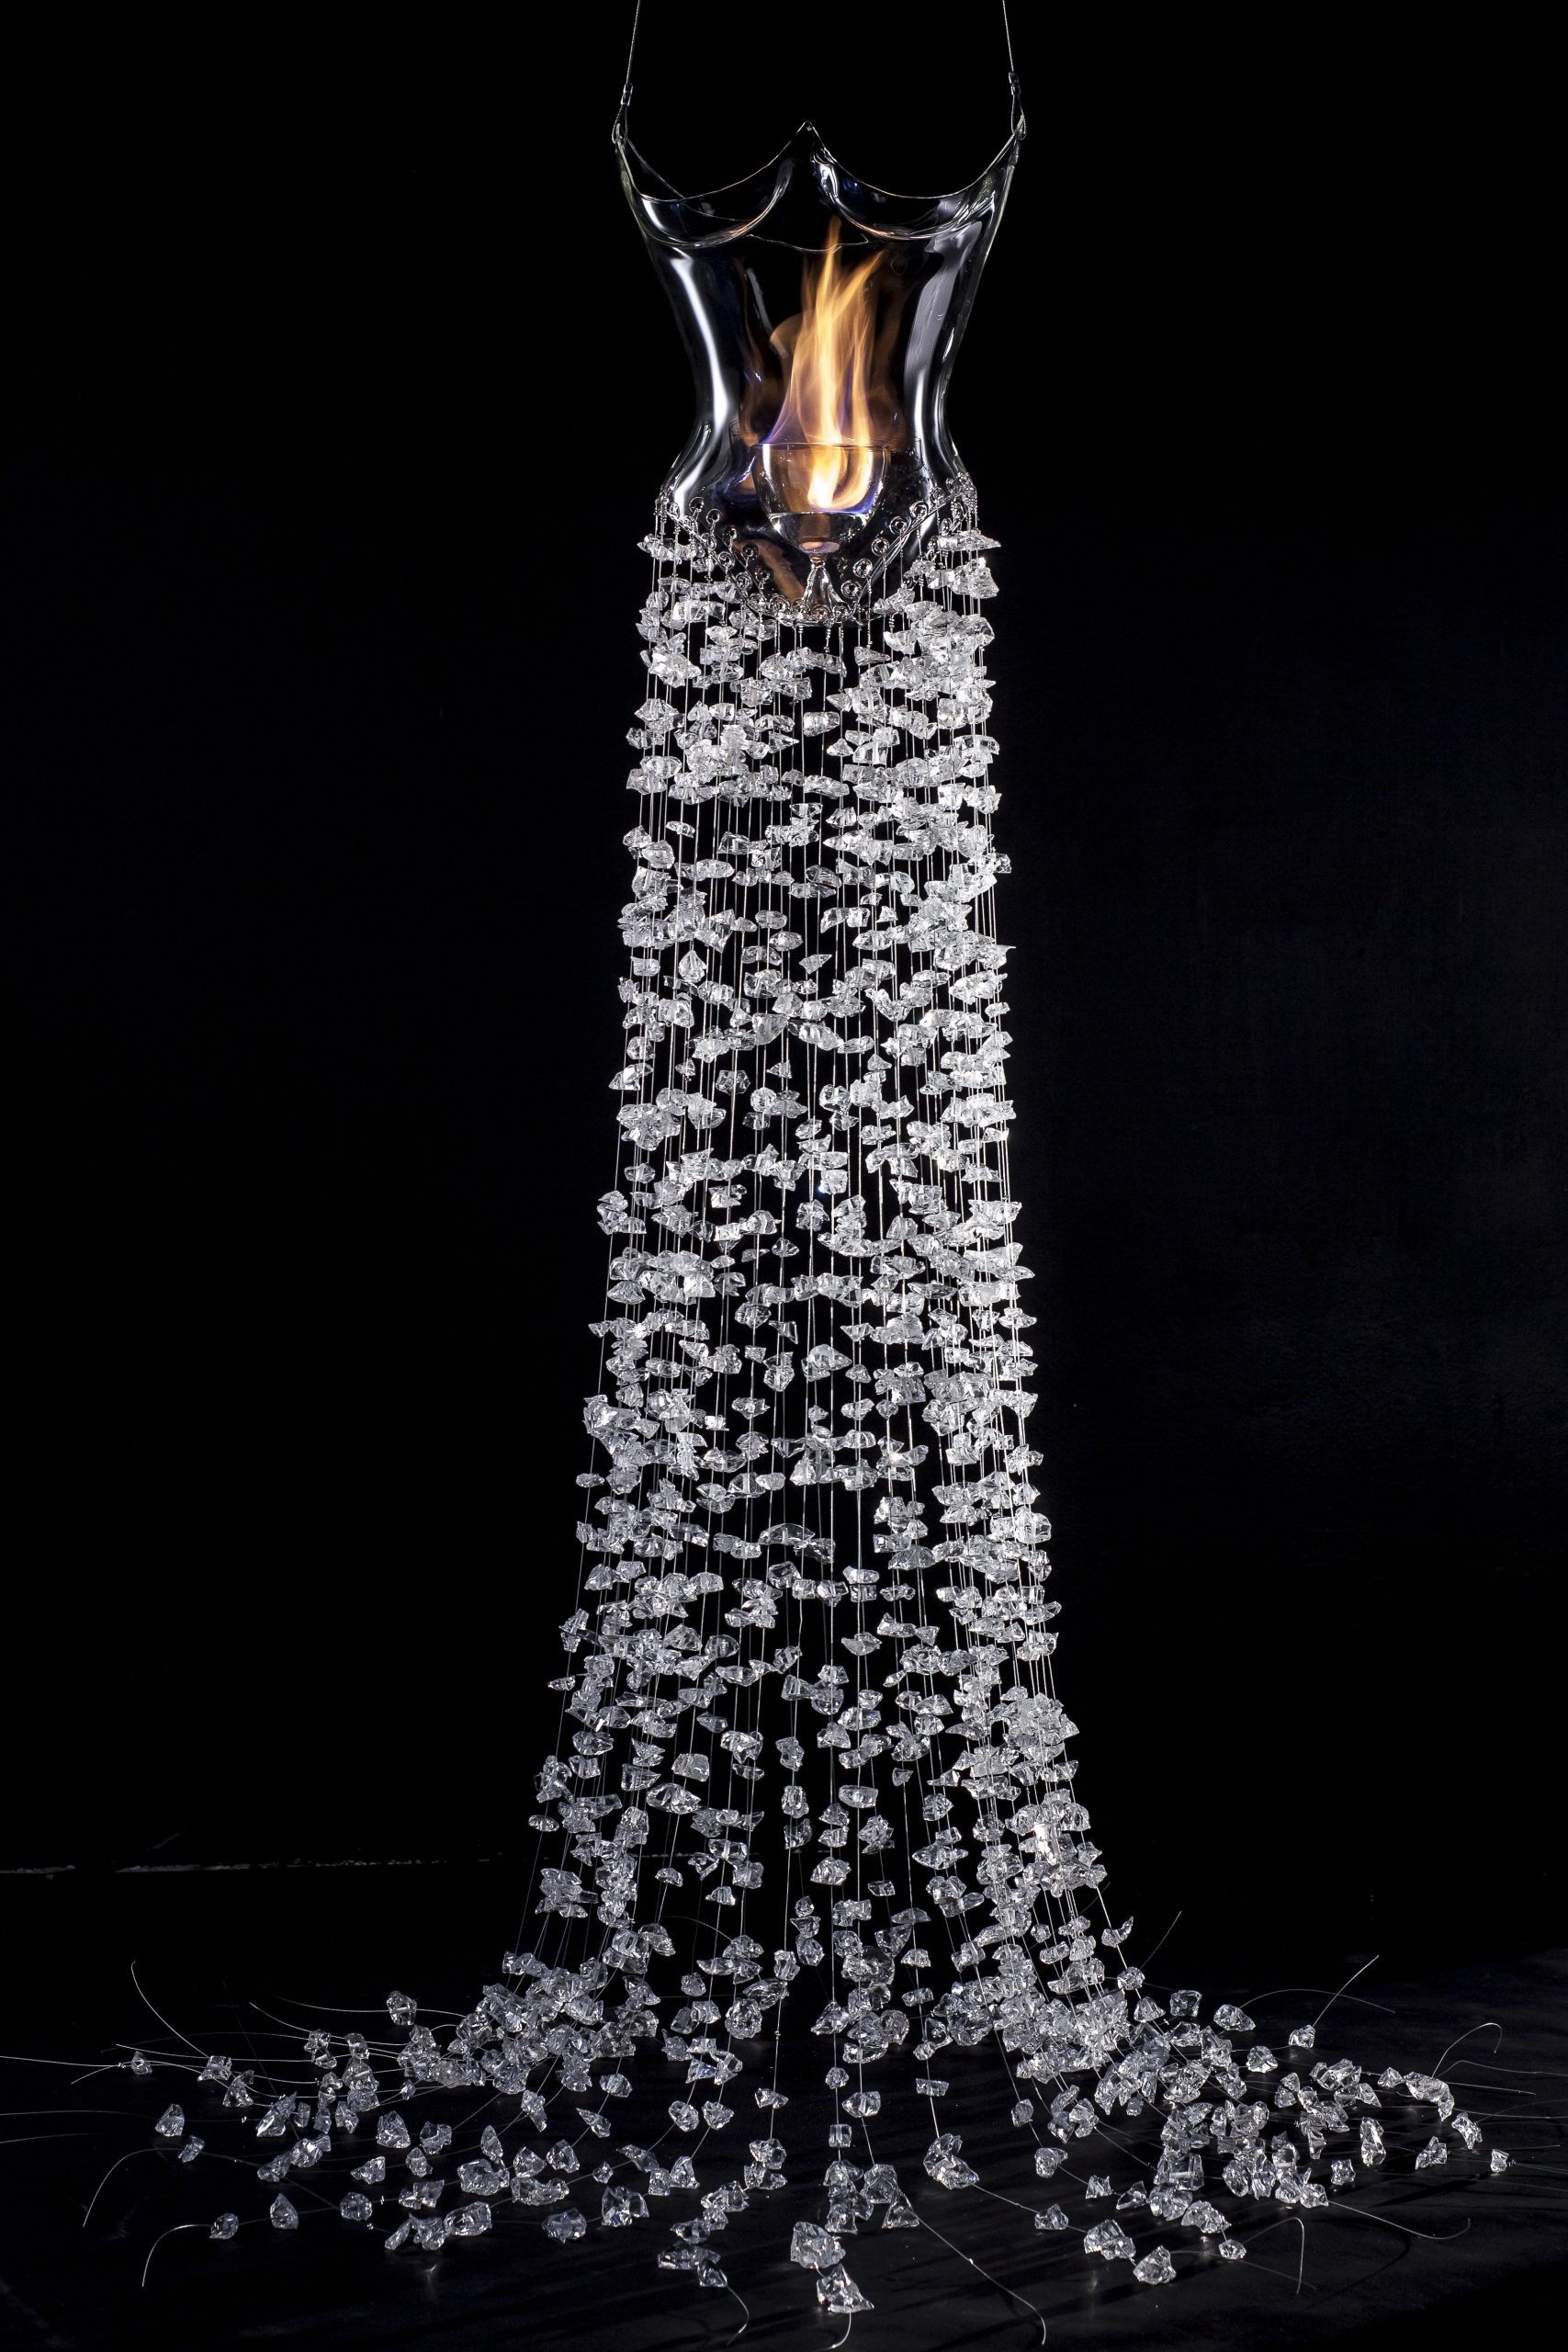 Helen Storey's The Dress of Glass and Flame, 2013